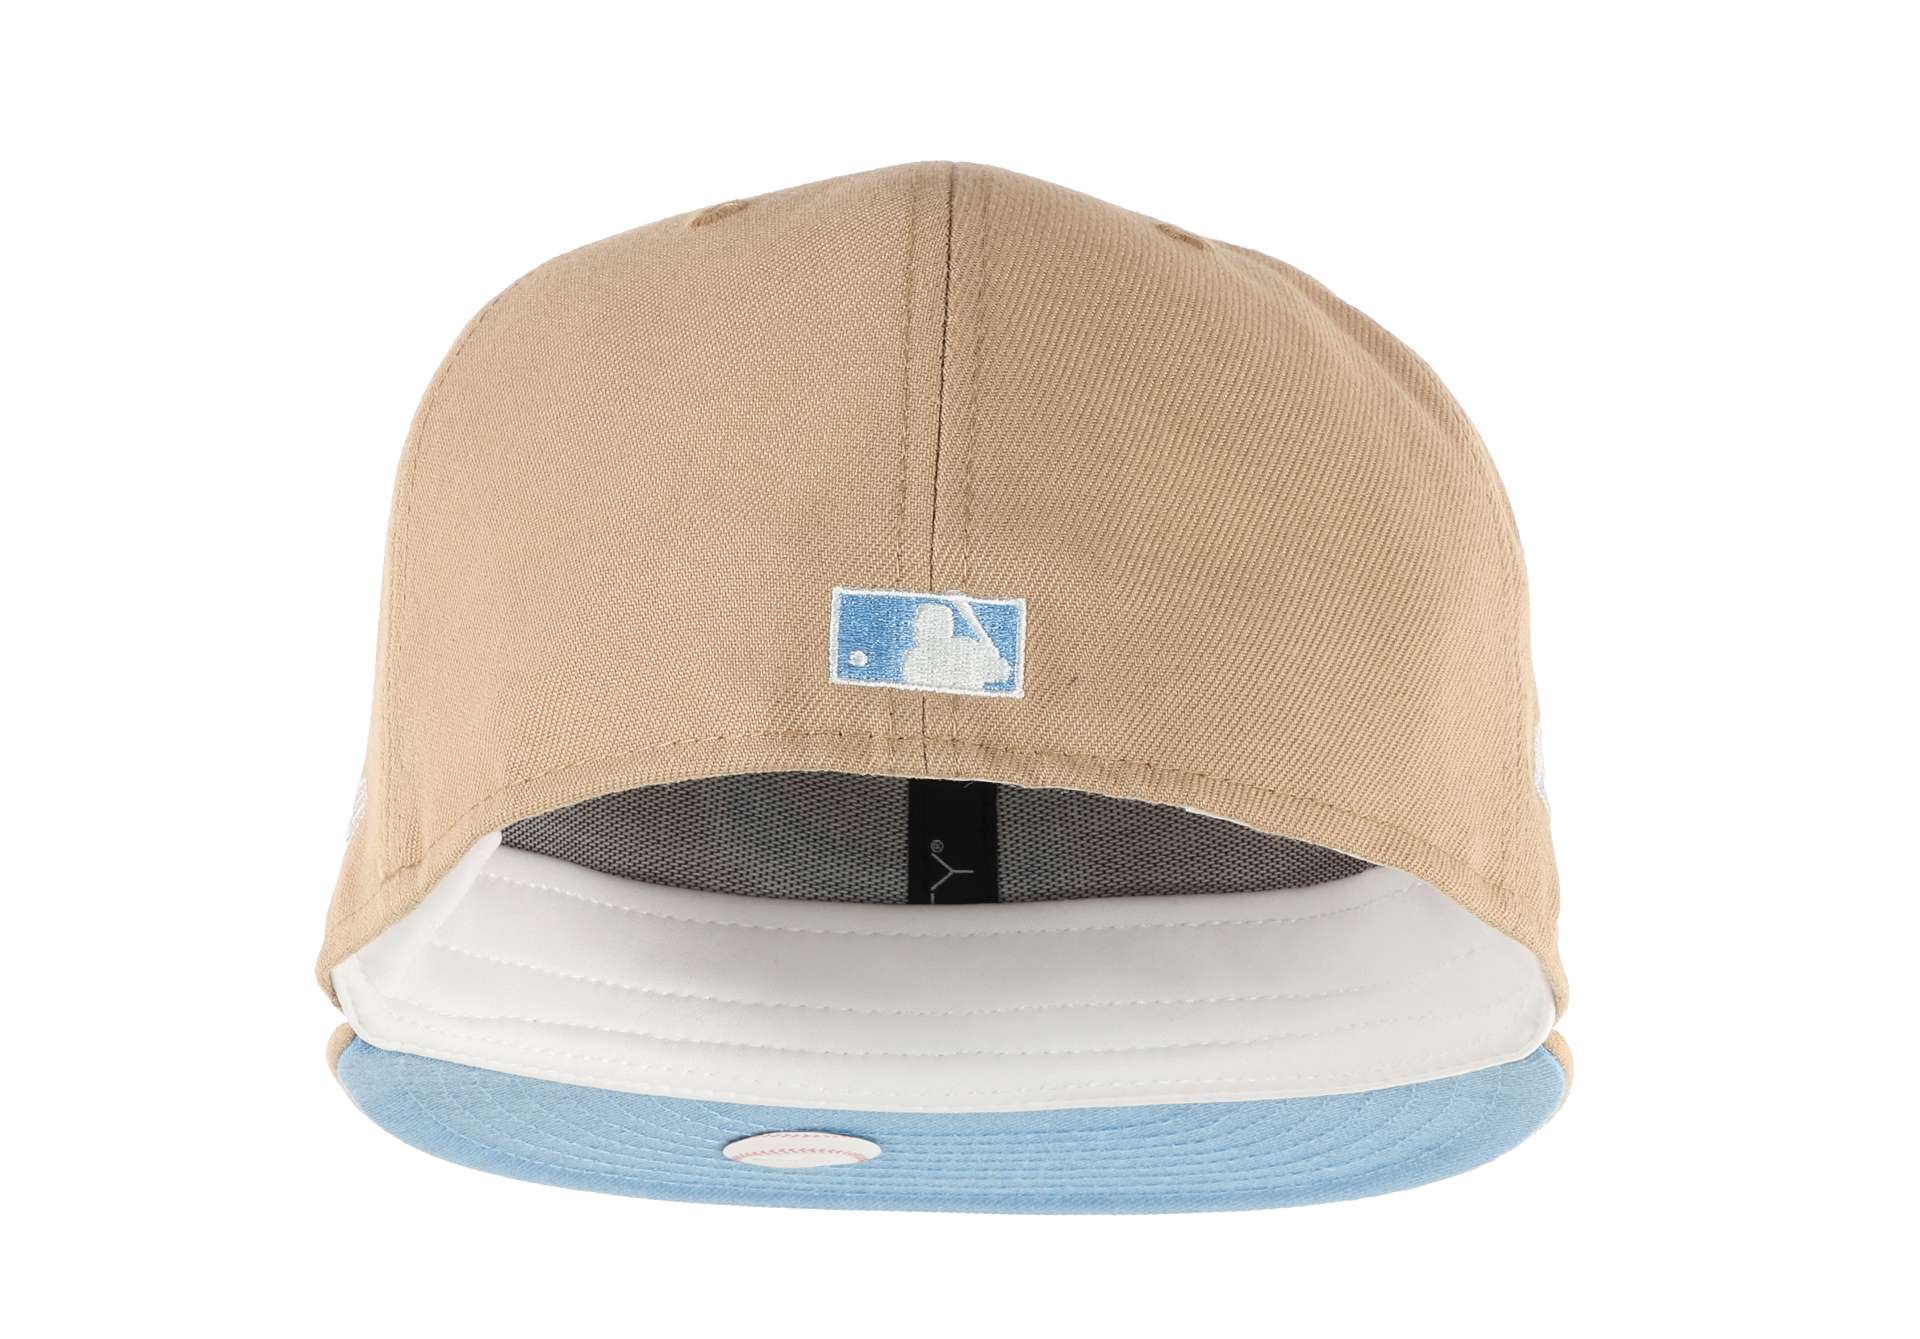 Detroit Tigers MLB Cooperstown World Series 1984 Sidepatch Camel Sky Blue 59Fifty Basecap New Era